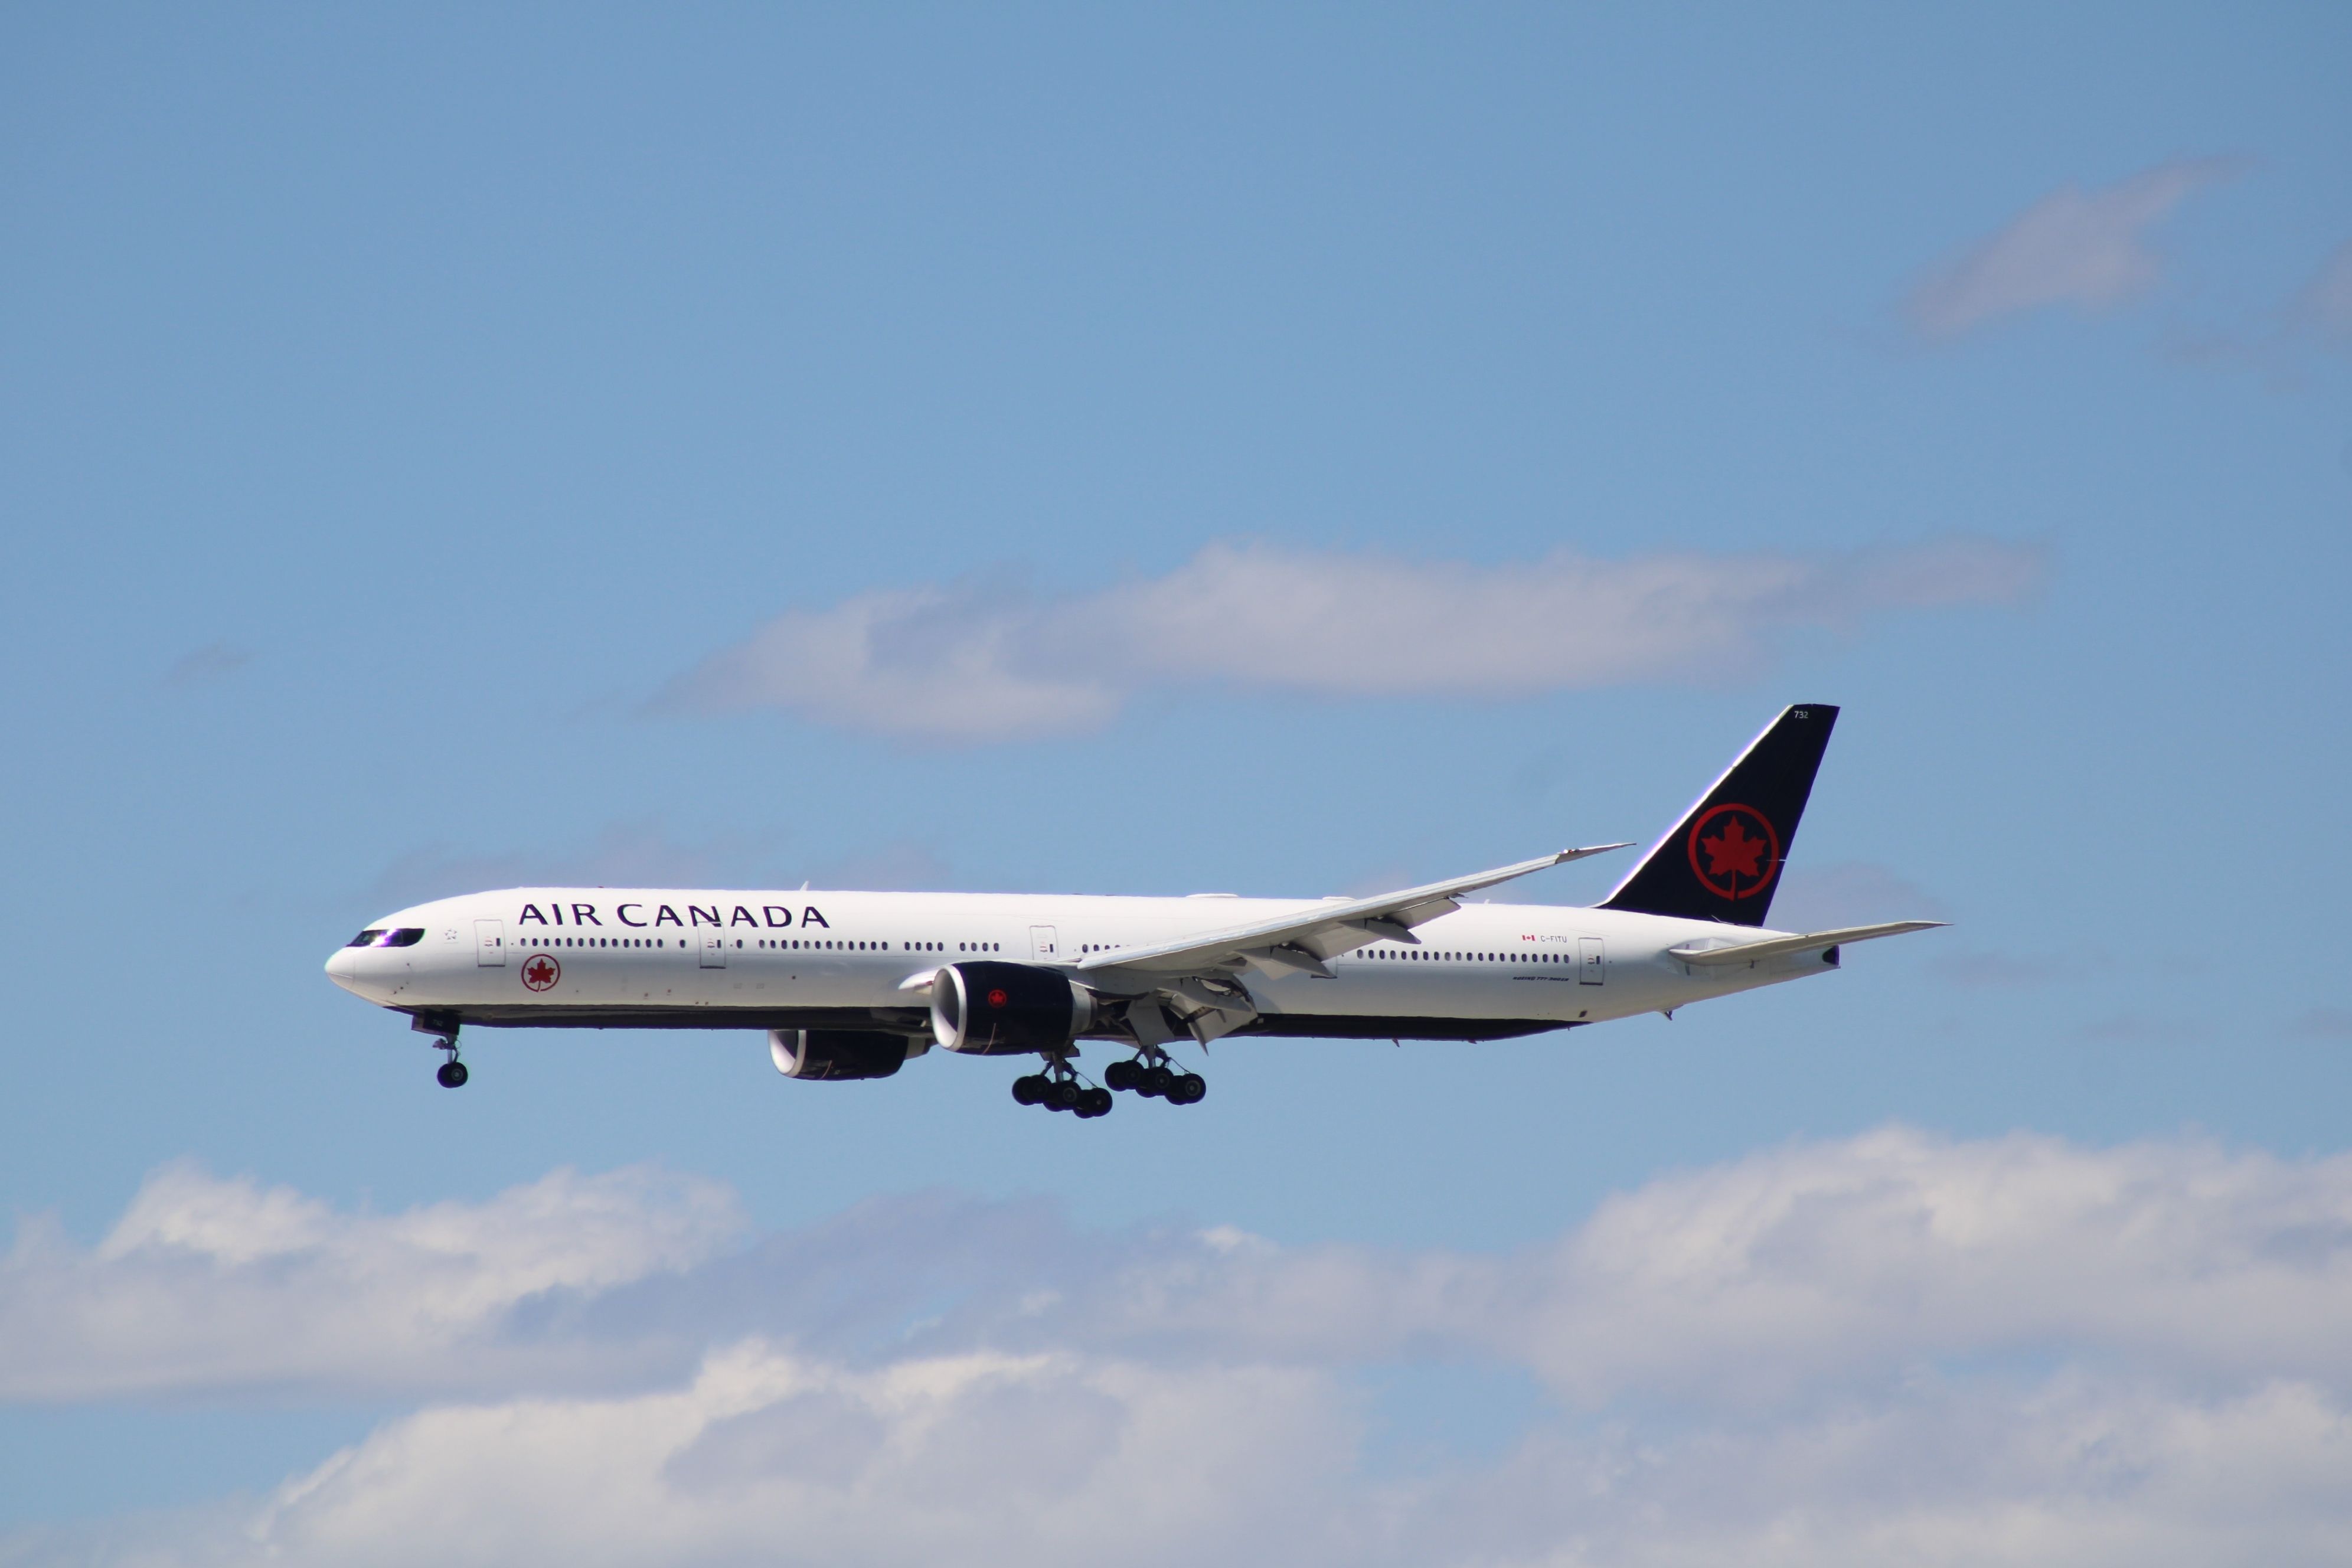 An Air Canada Boeing 777-300ER flying in the sky.